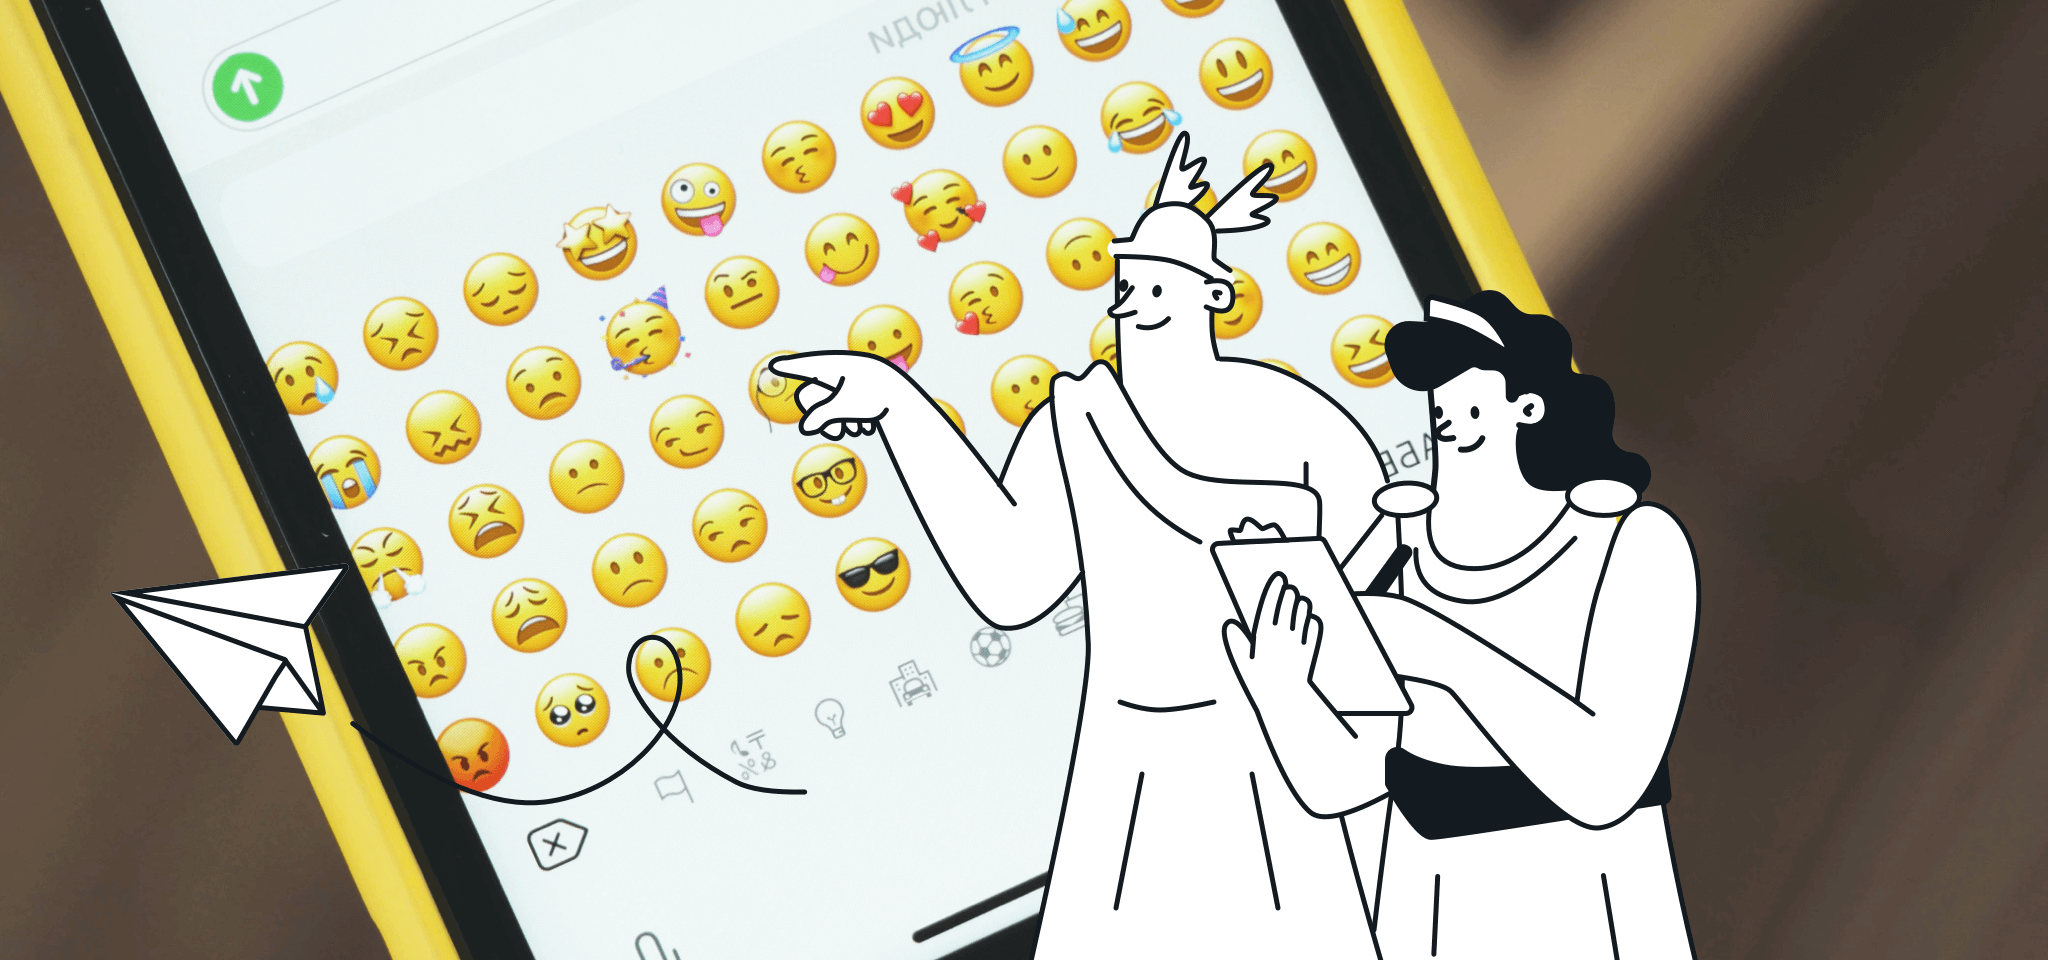 Hermes and another goddess choose emoticons